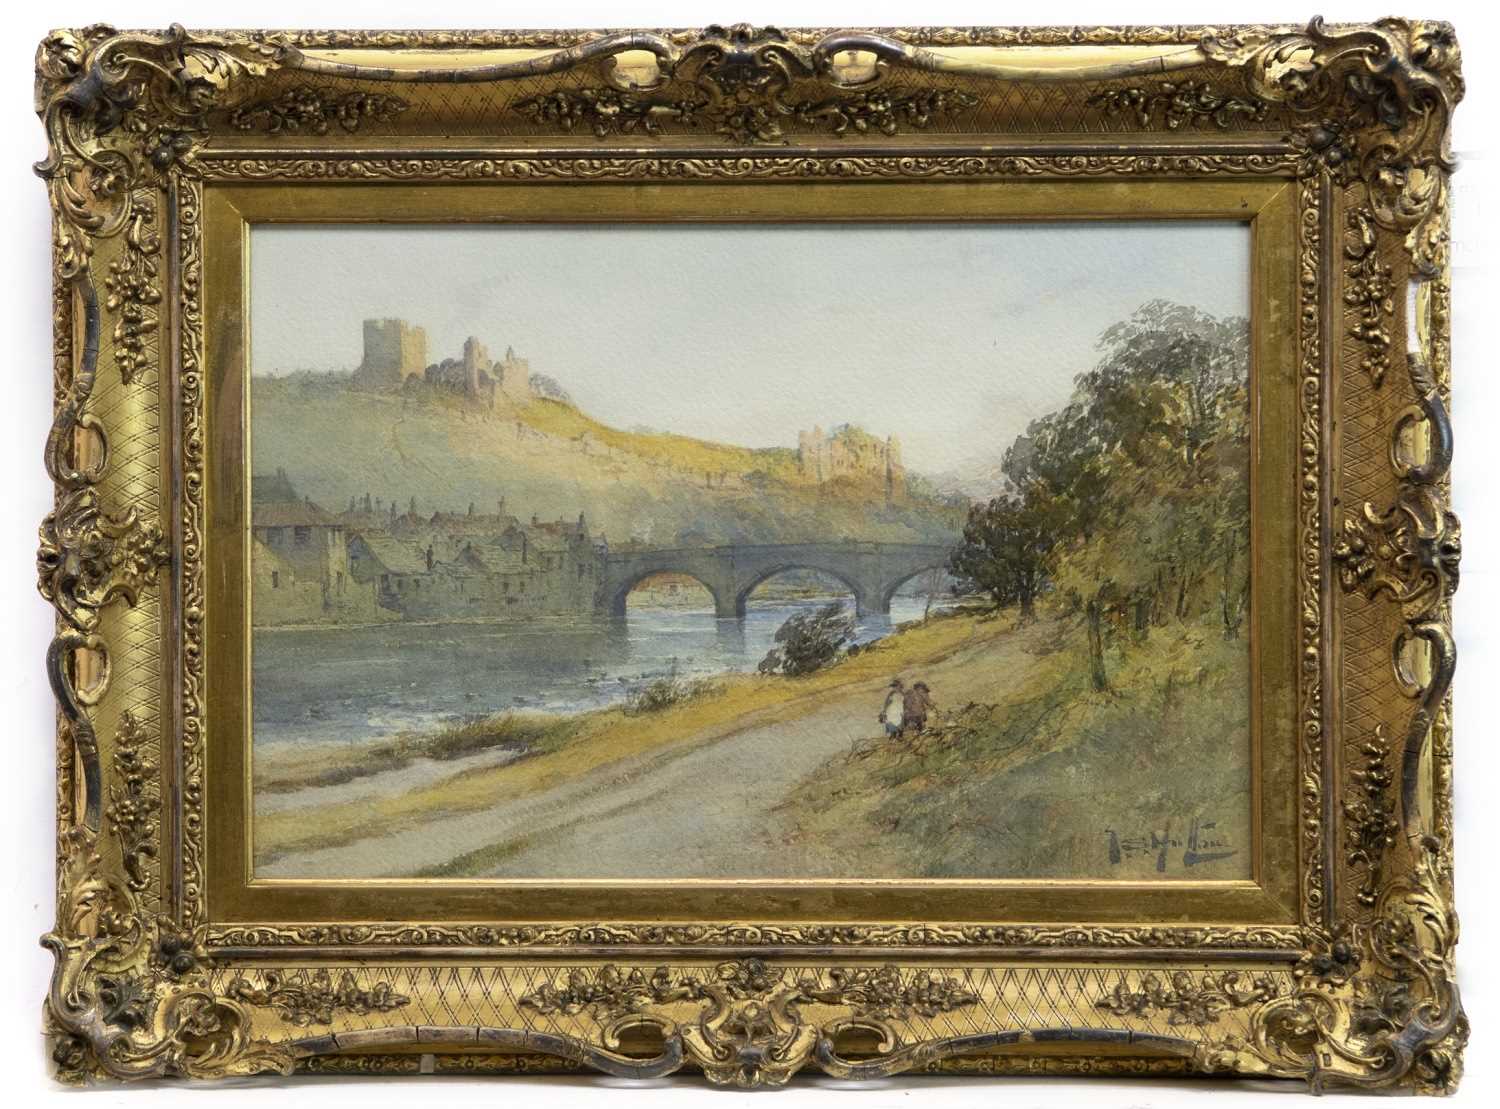 Lot 142 - RIVER SCENE, NORTHUMBERLAND, A WATERCOLOUR BY THOMAS HUTTON